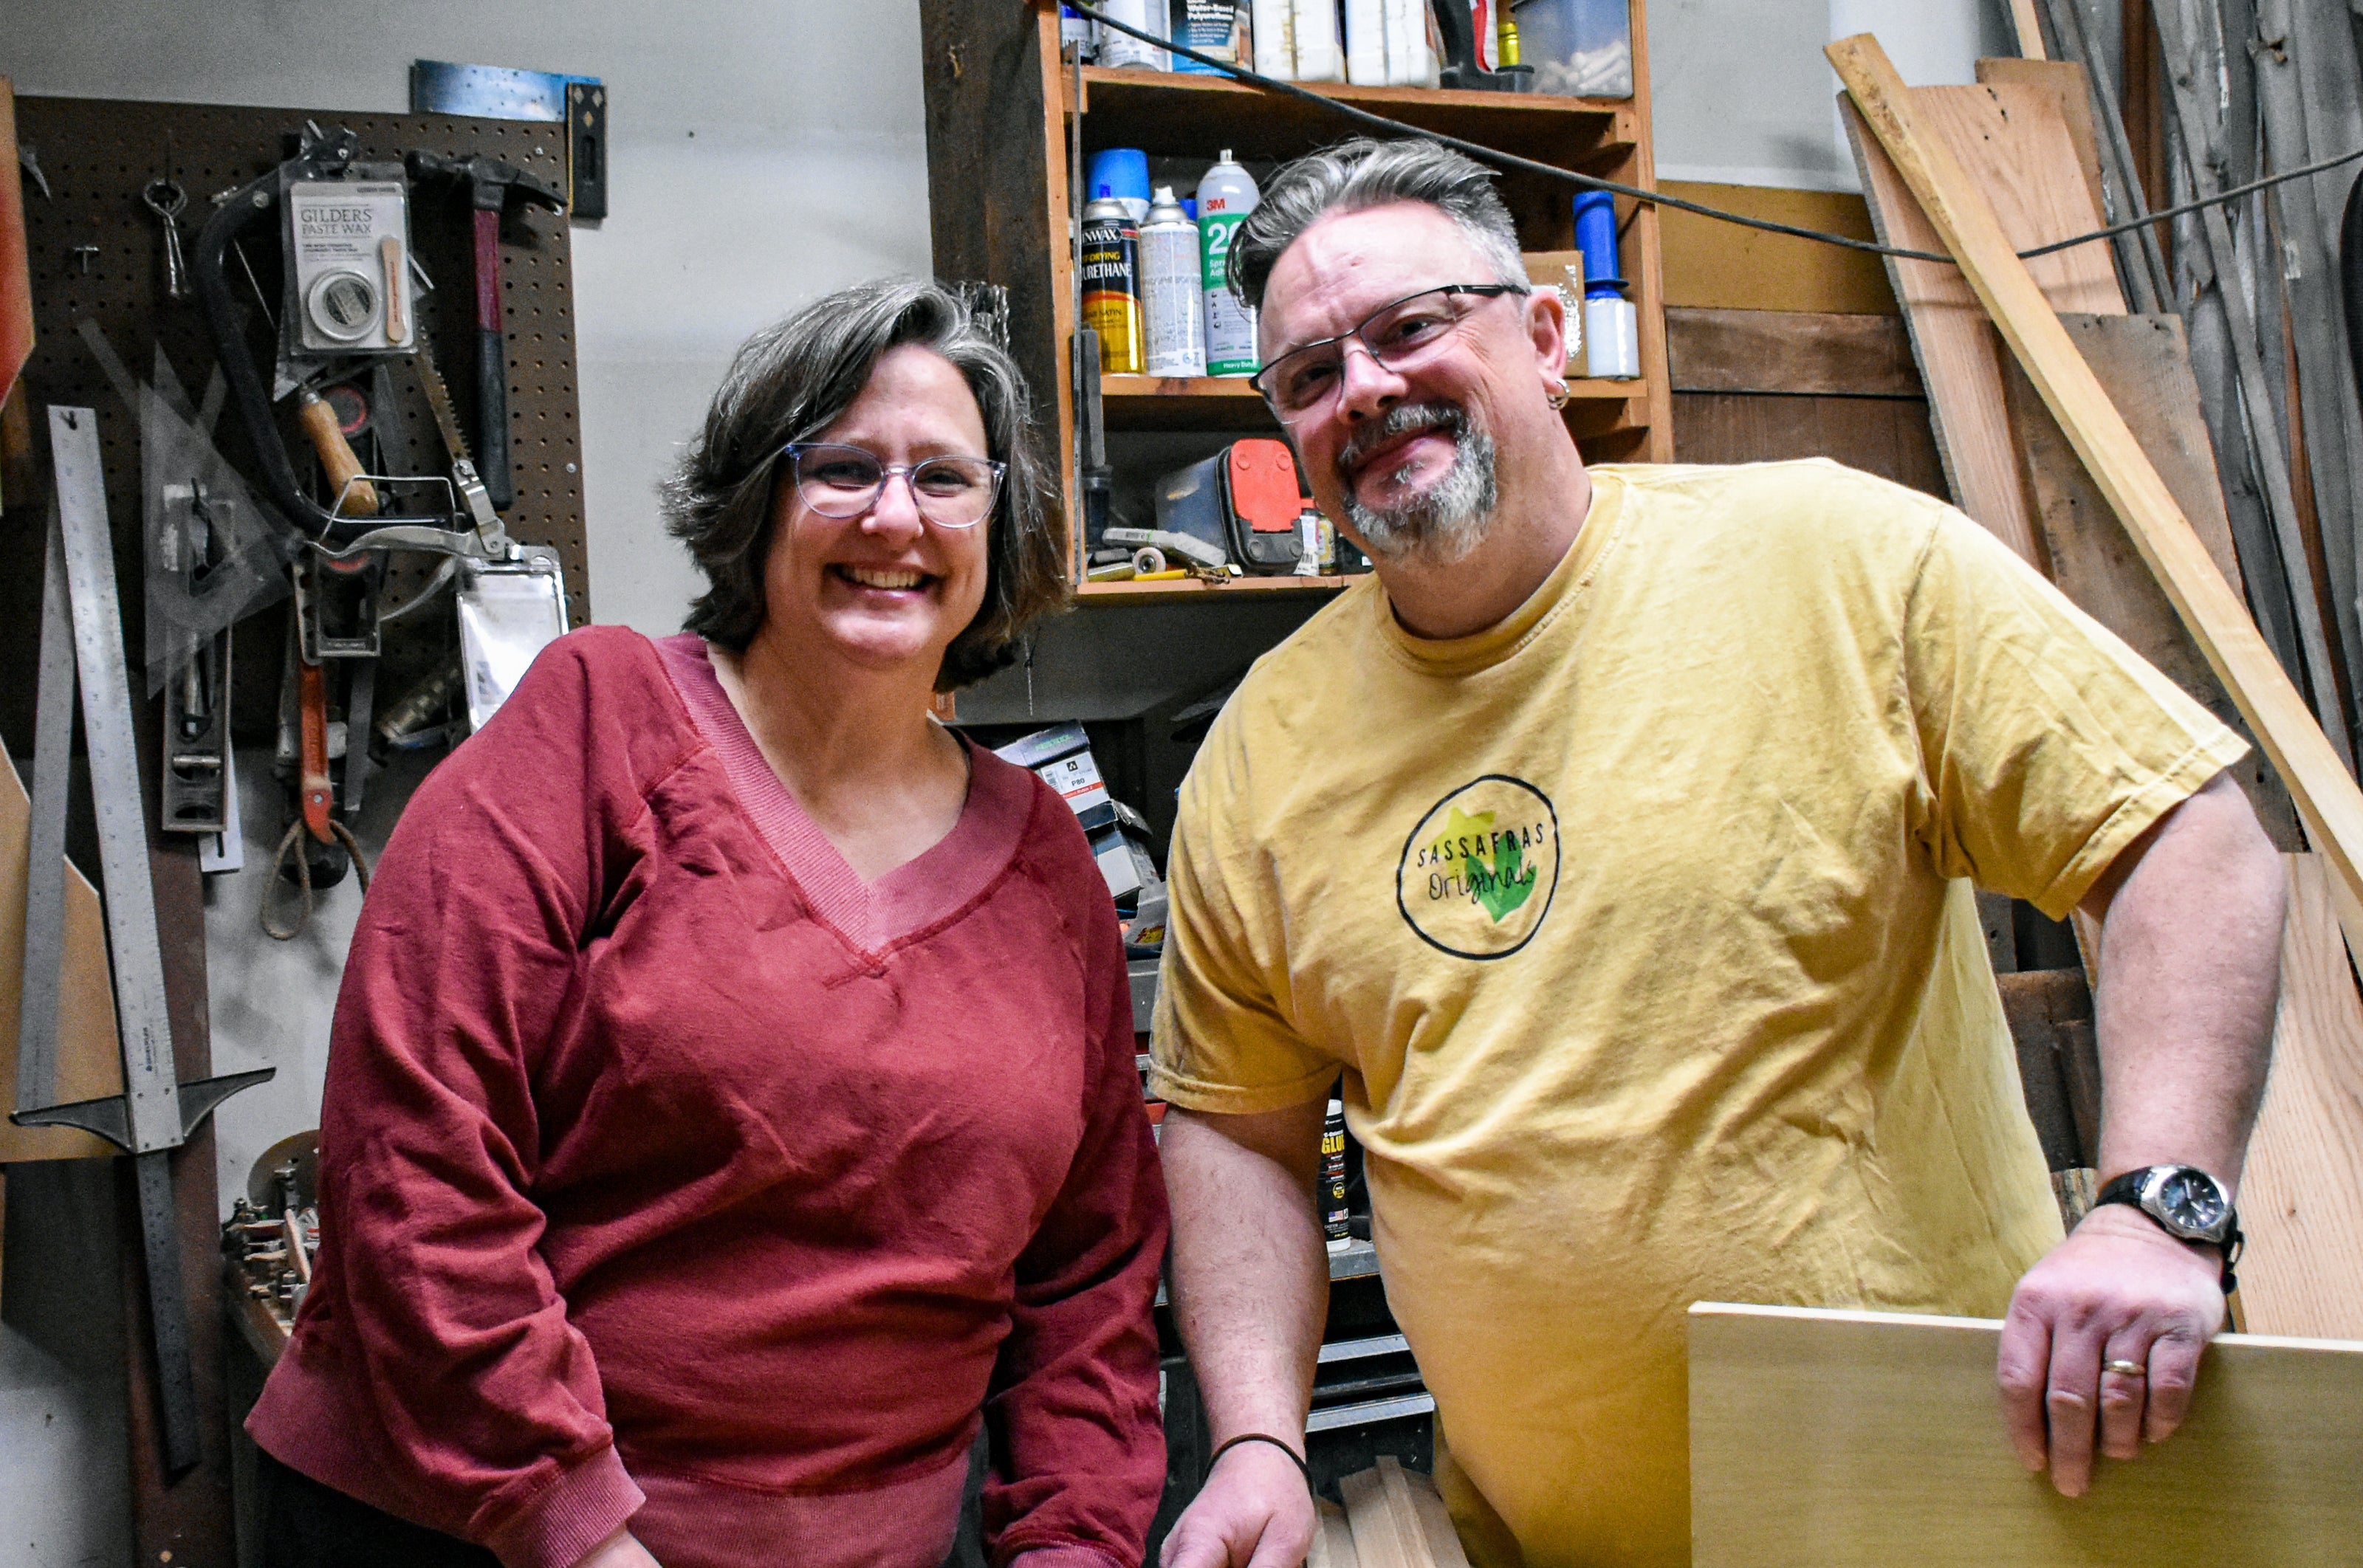 The owners in their garage where Christopher makes wood bowls and boards